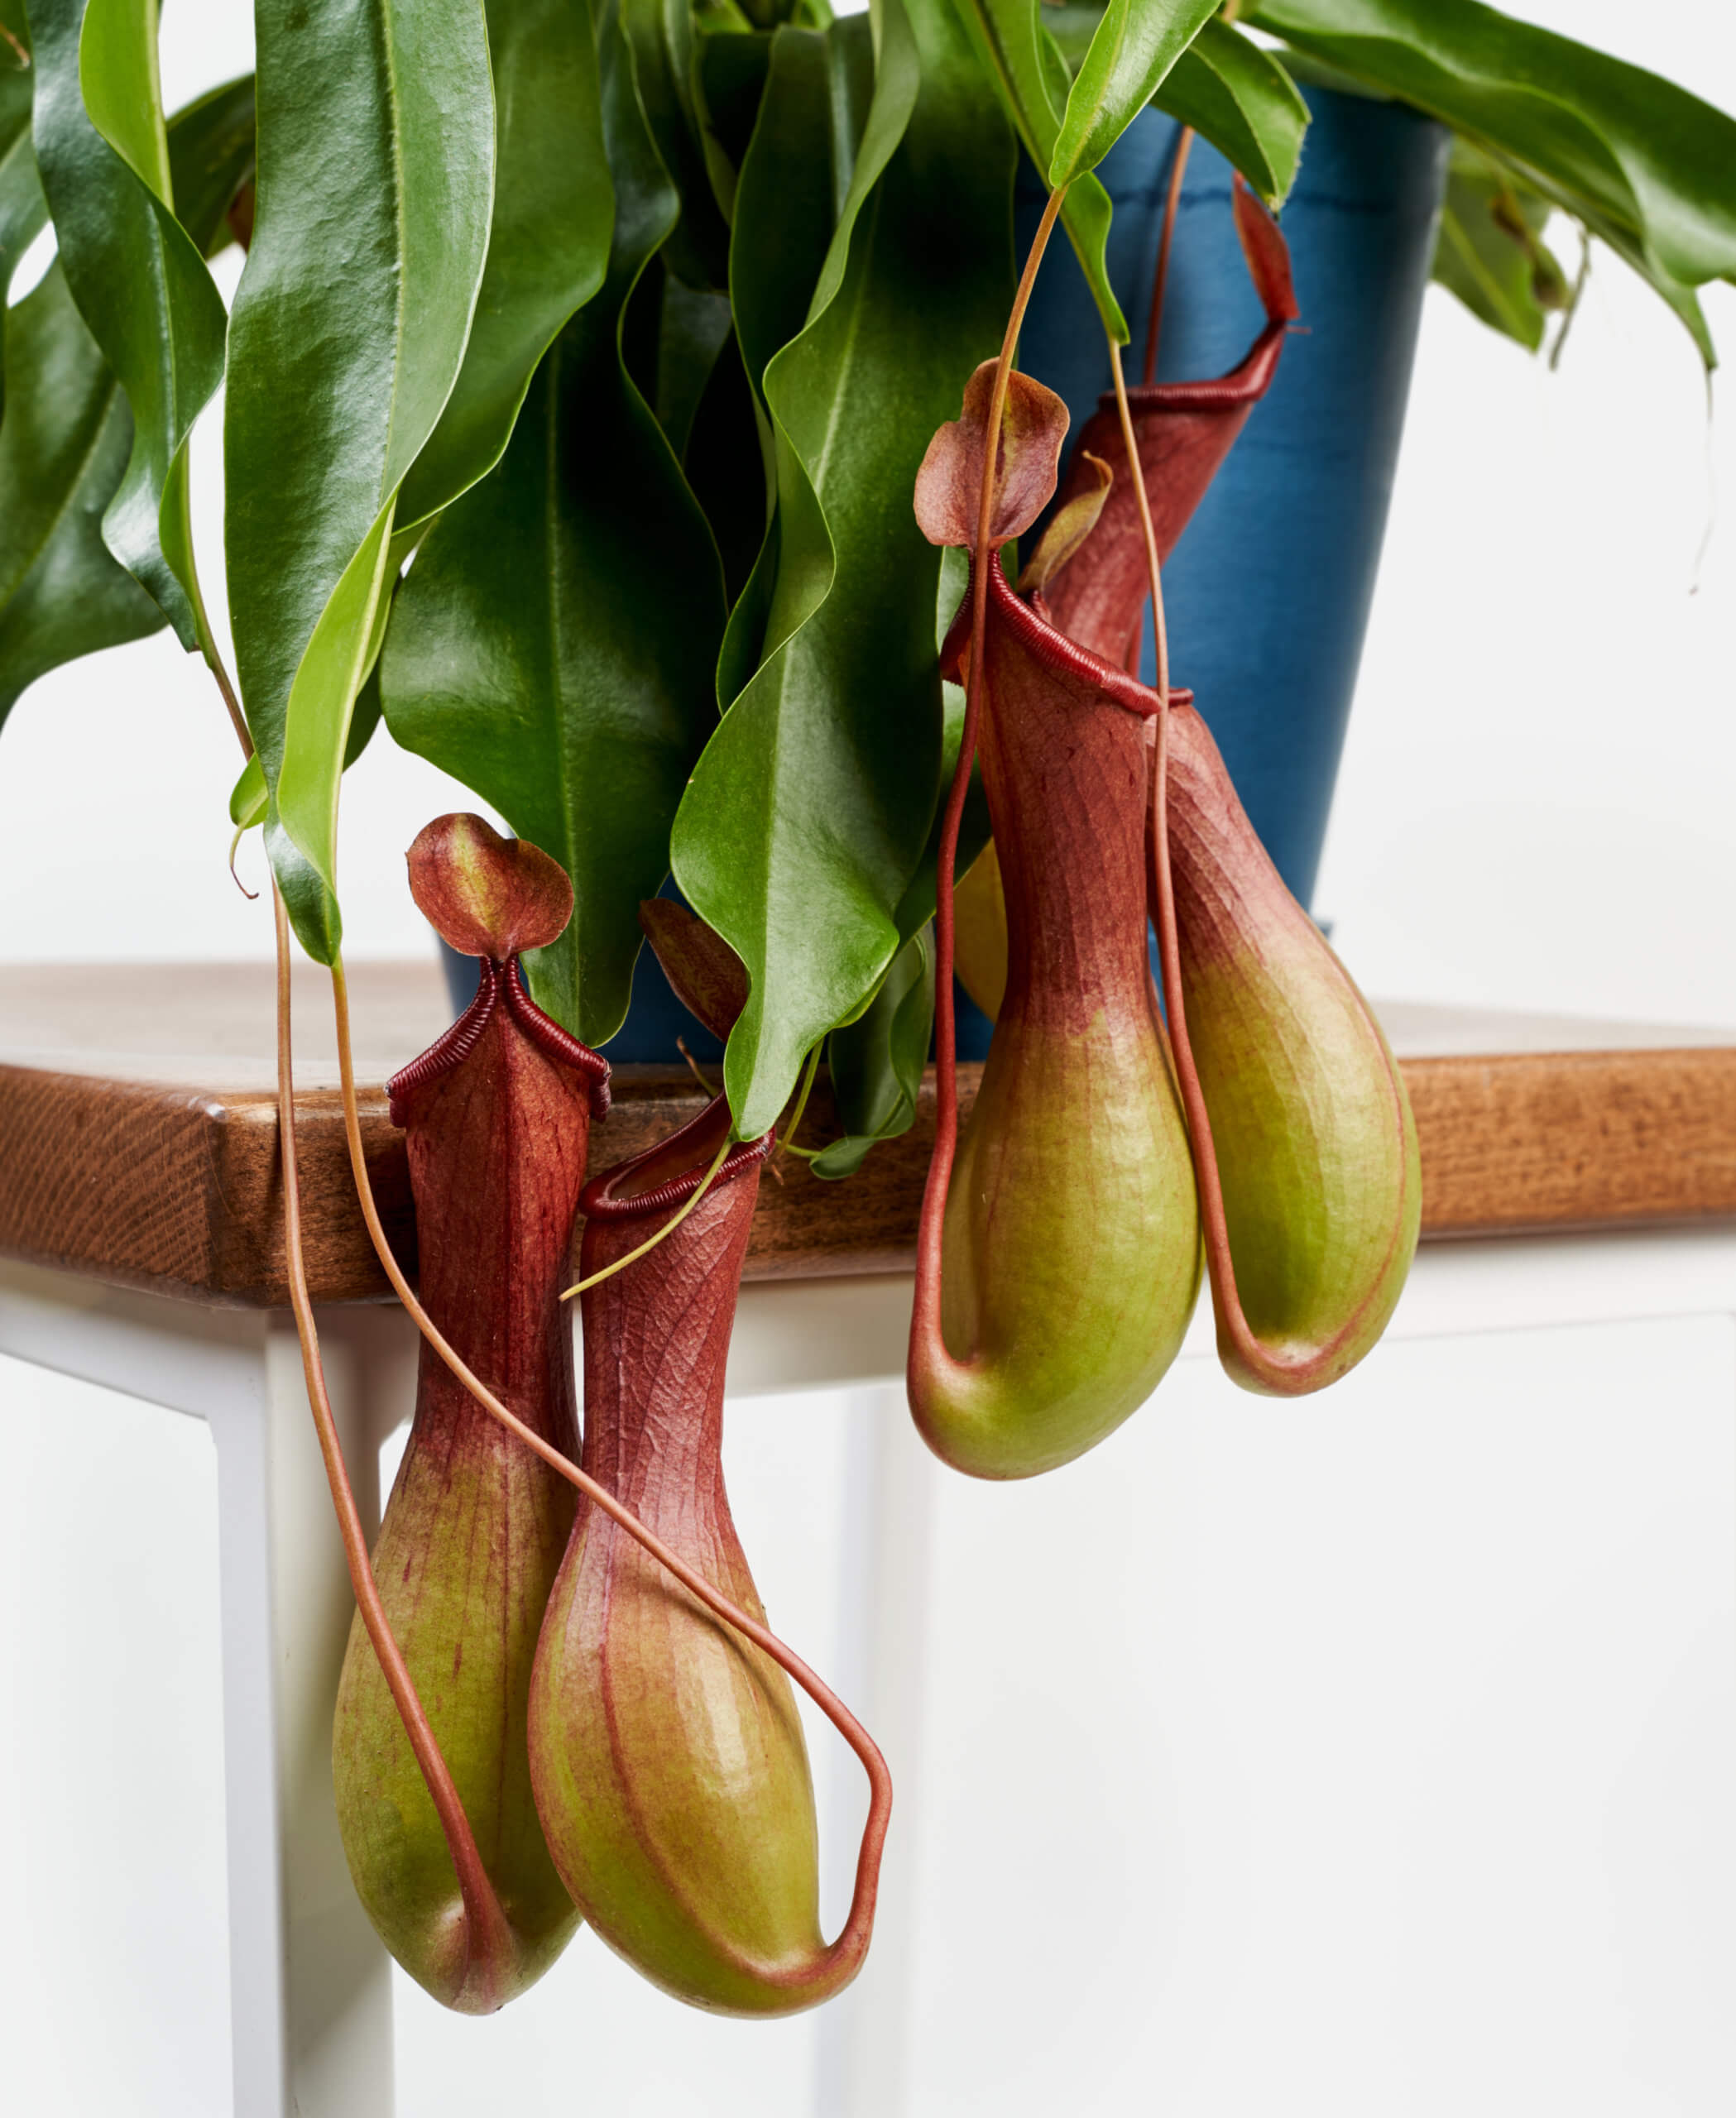 nepenthes pitcher plant eating